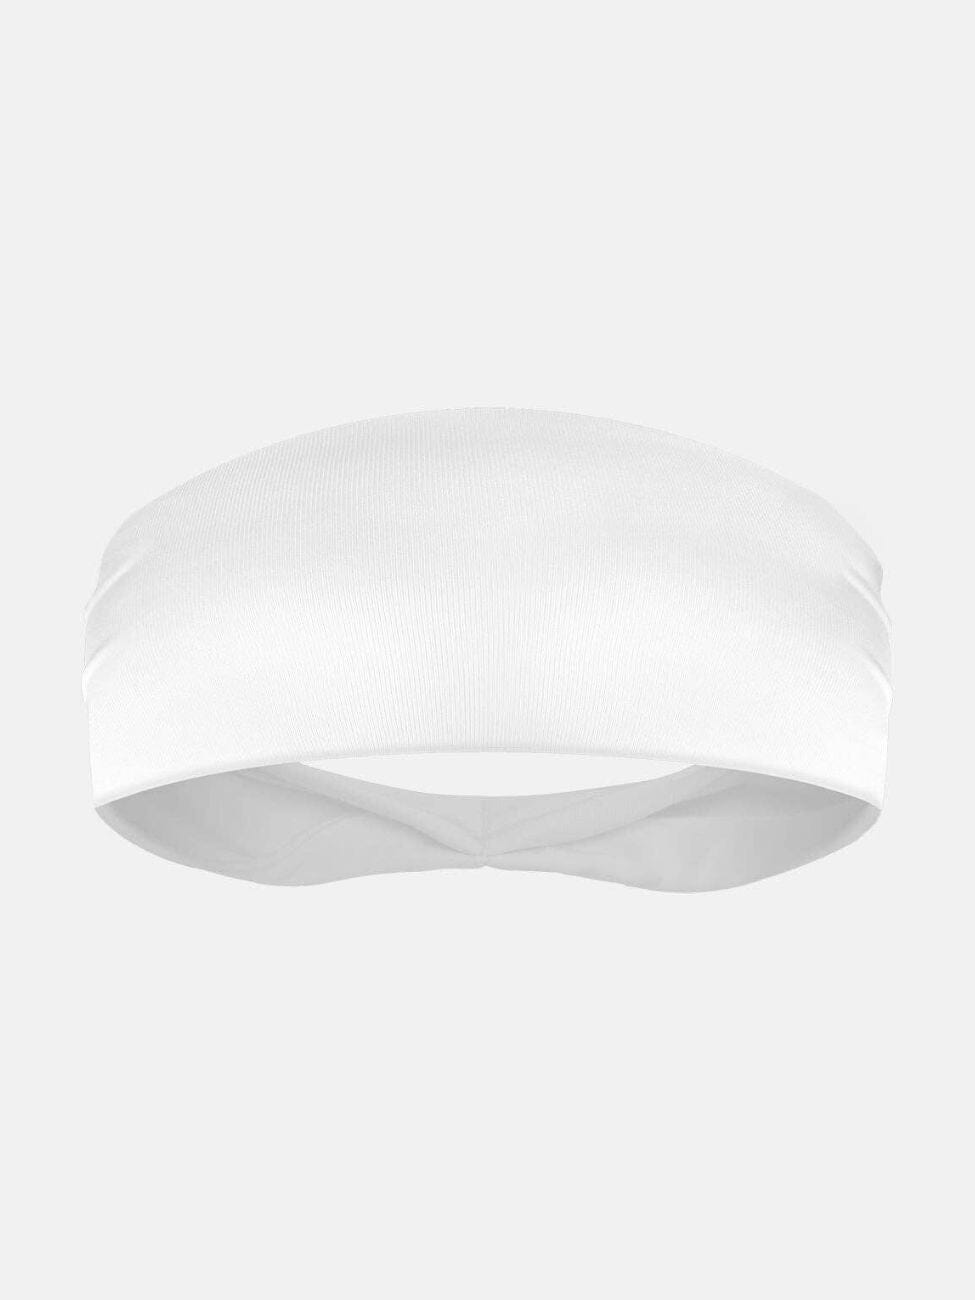 THICK WHITE ATHLETIC HEADBAND Accessories SLEEF 